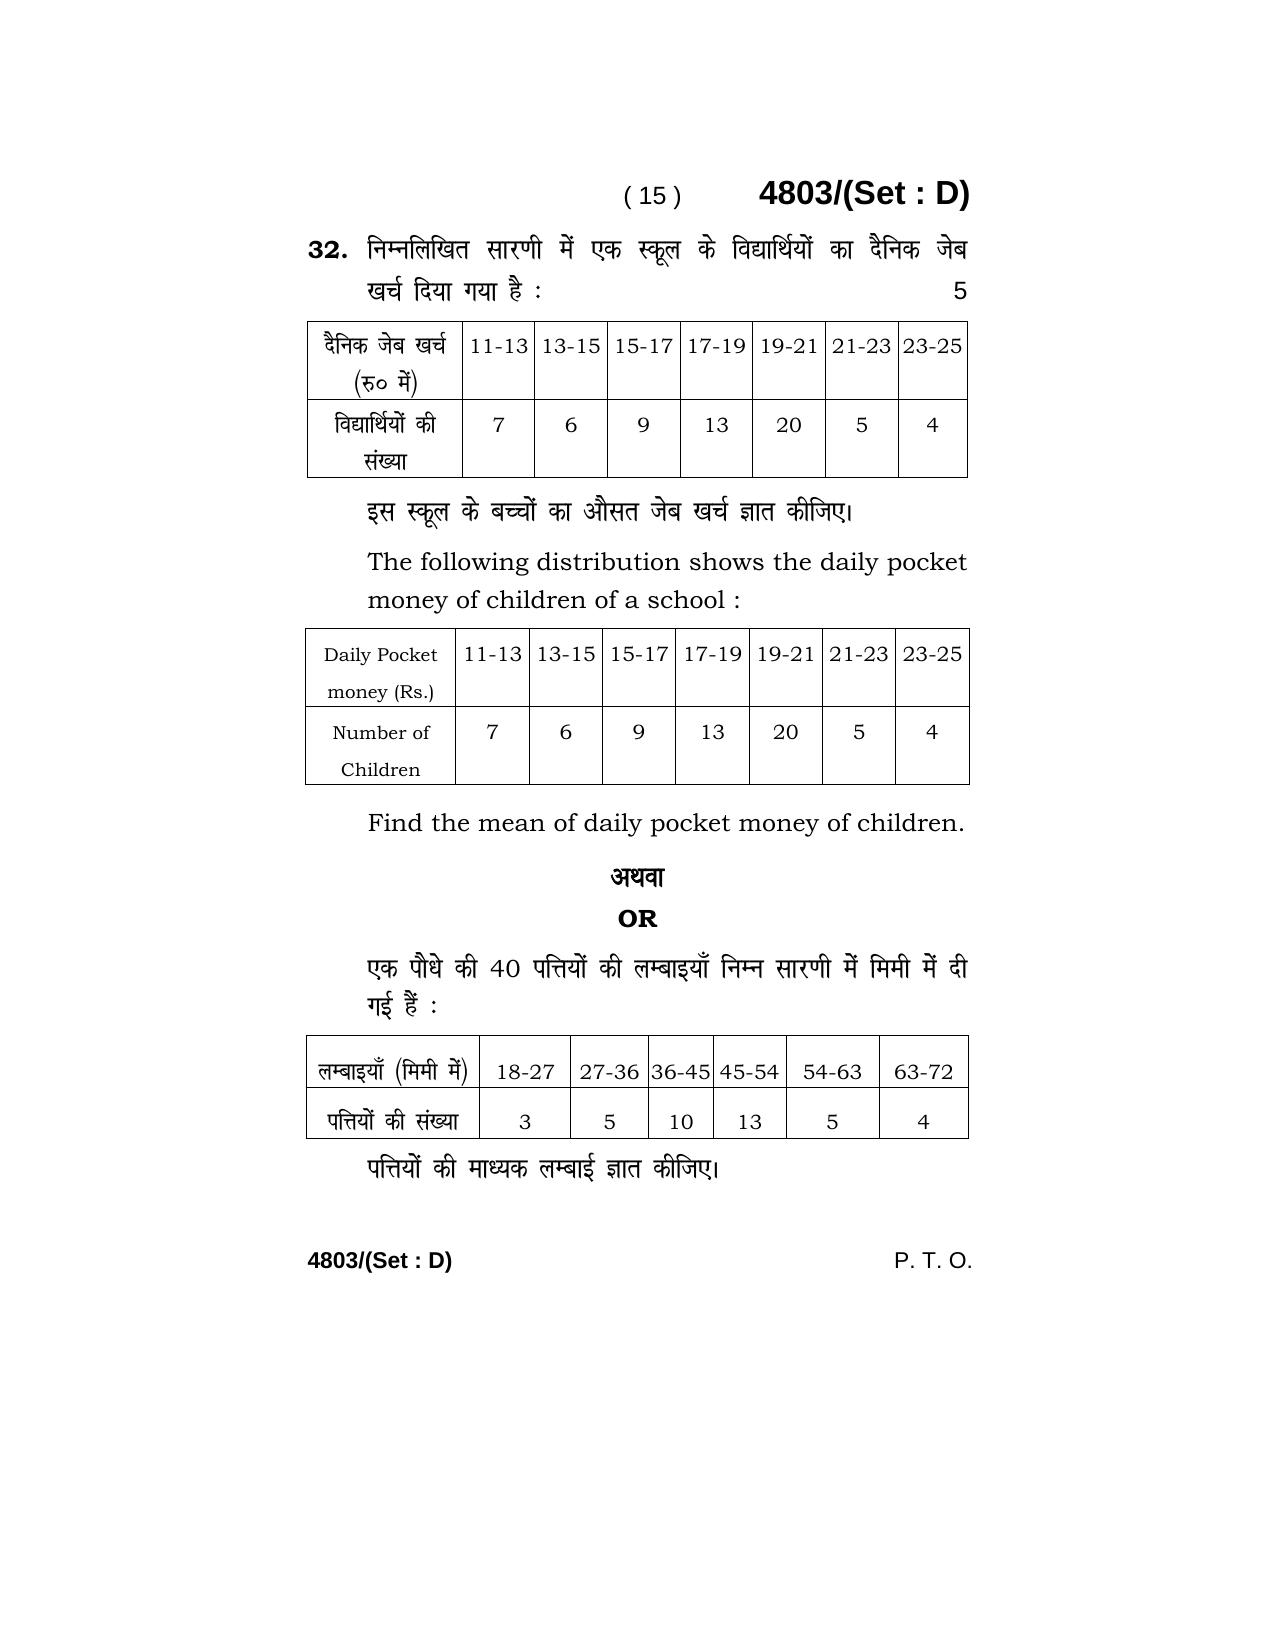 Haryana Board HBSE Class 10 Mathematics 2020 Question Paper - Page 63